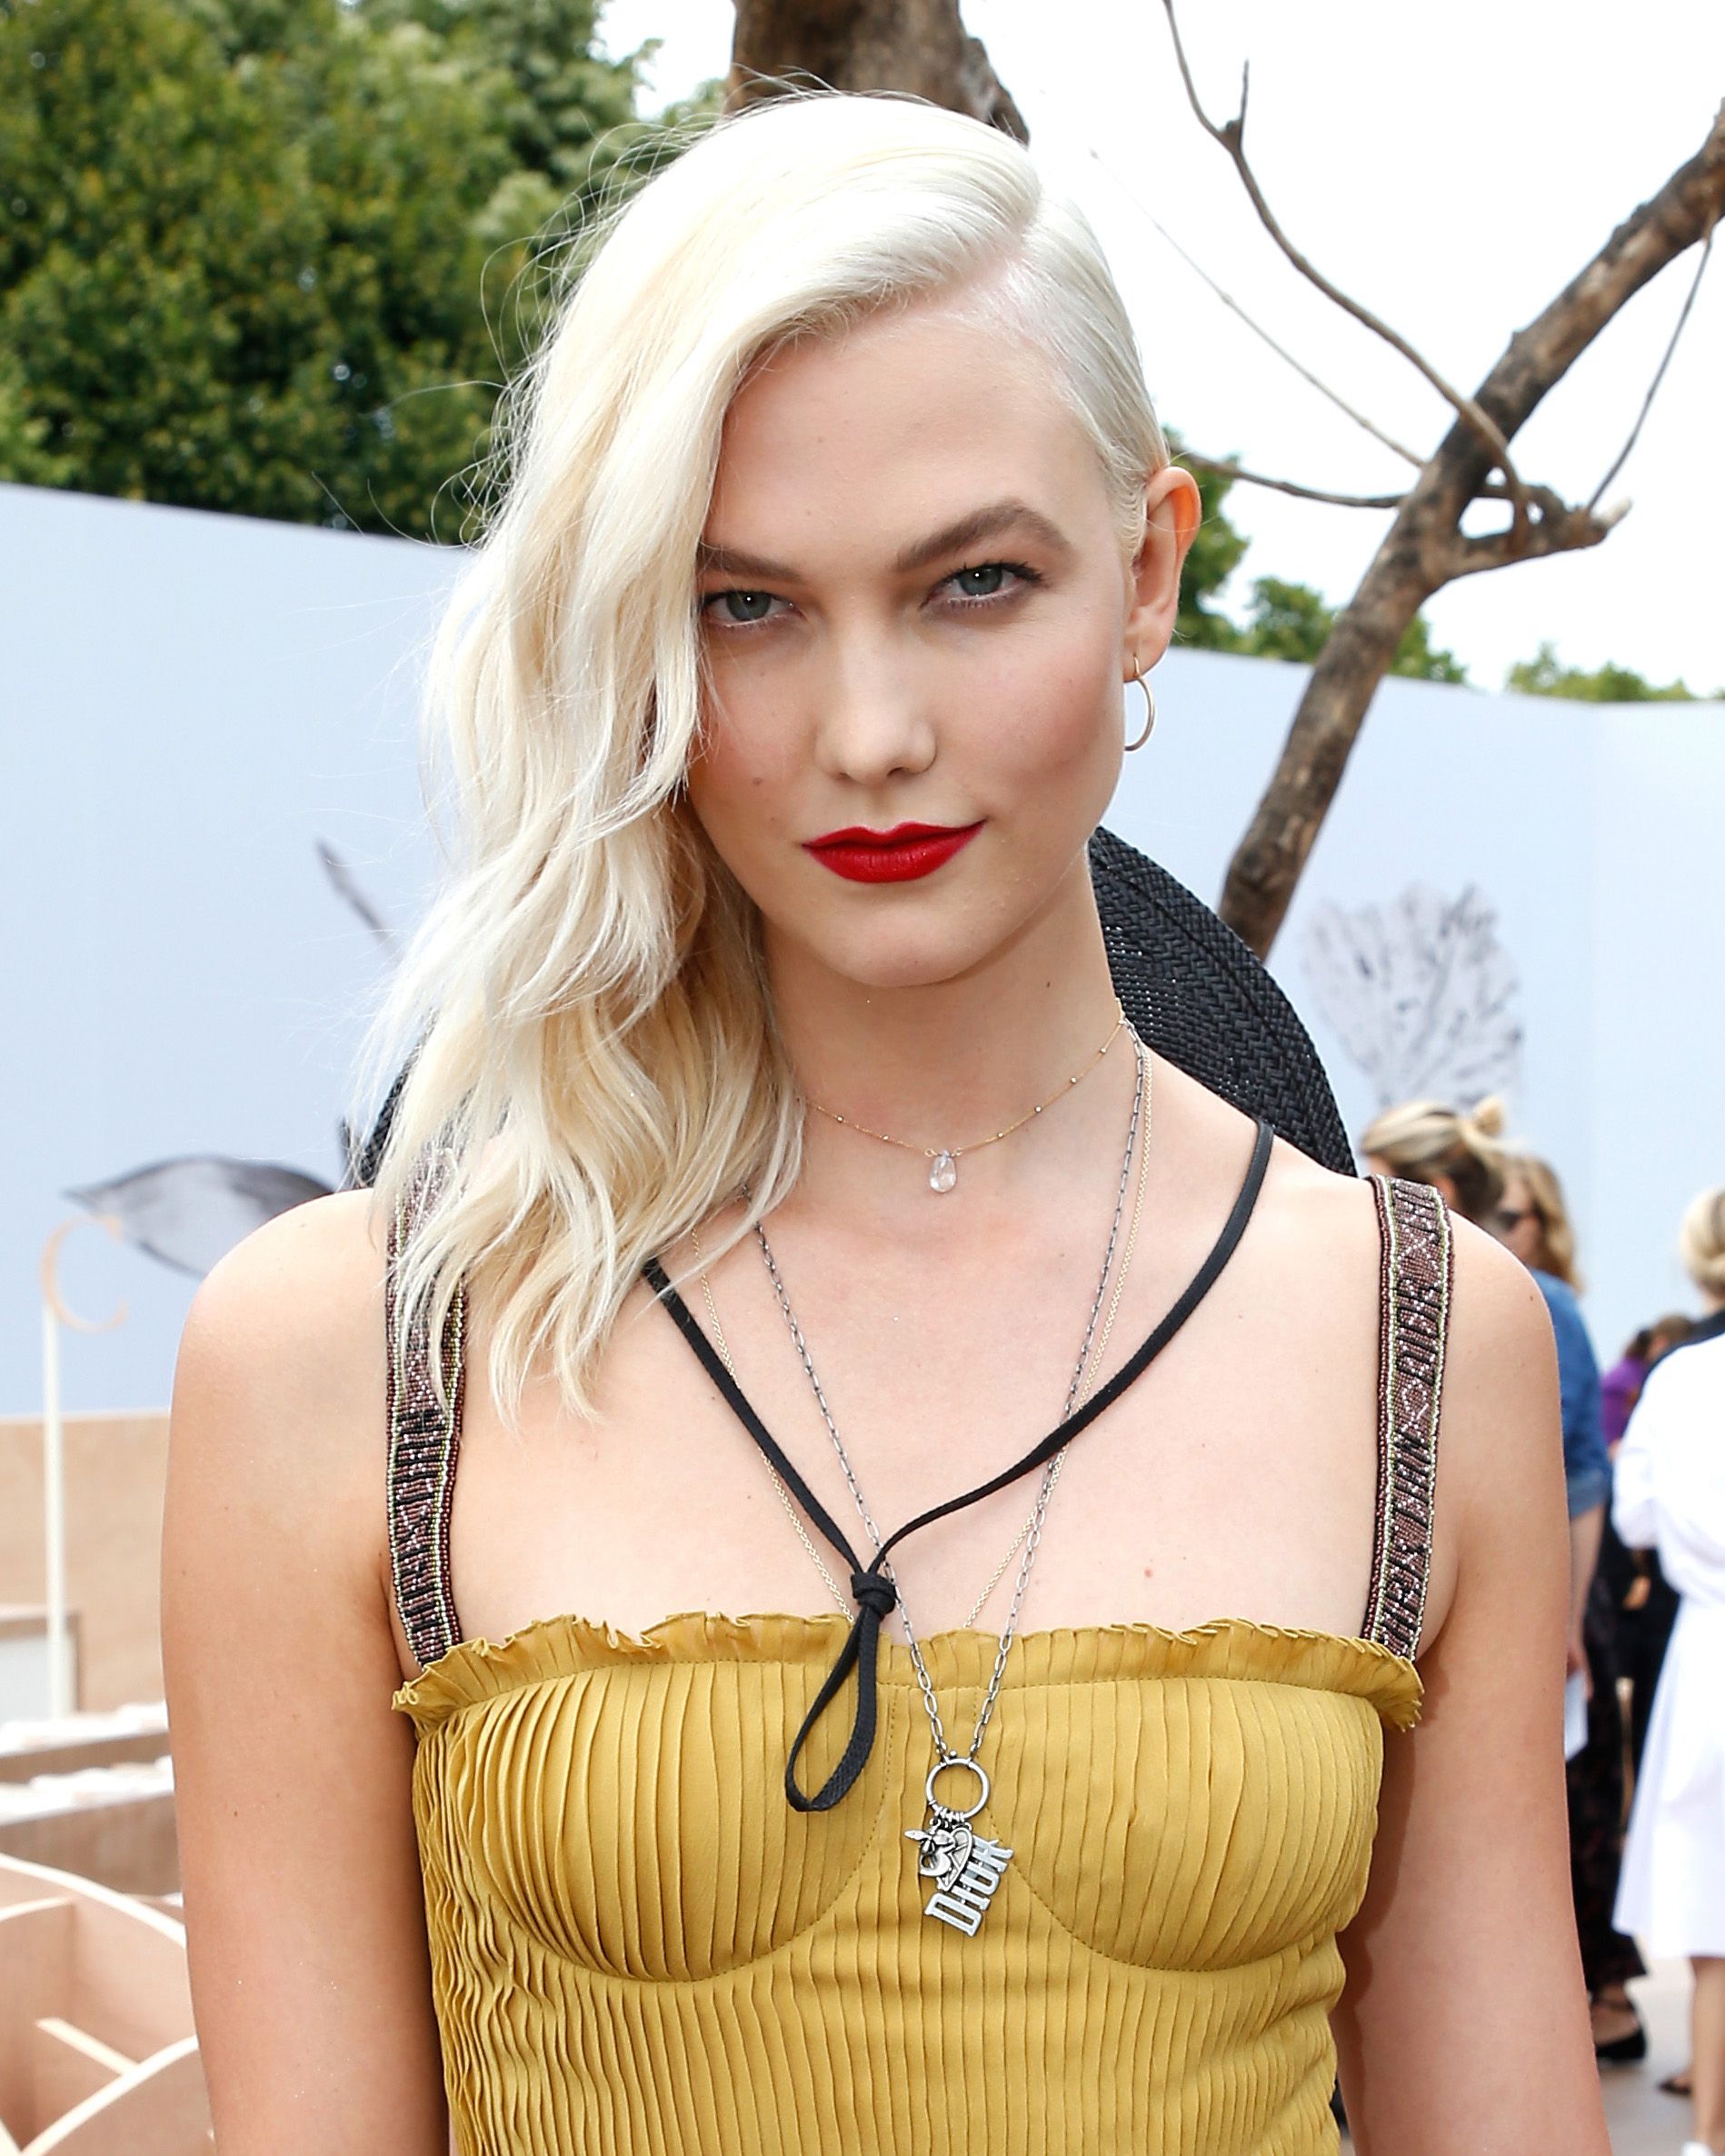 Platinum Blonde Hair - Pictures Of Celebrities With White Blonde Hair